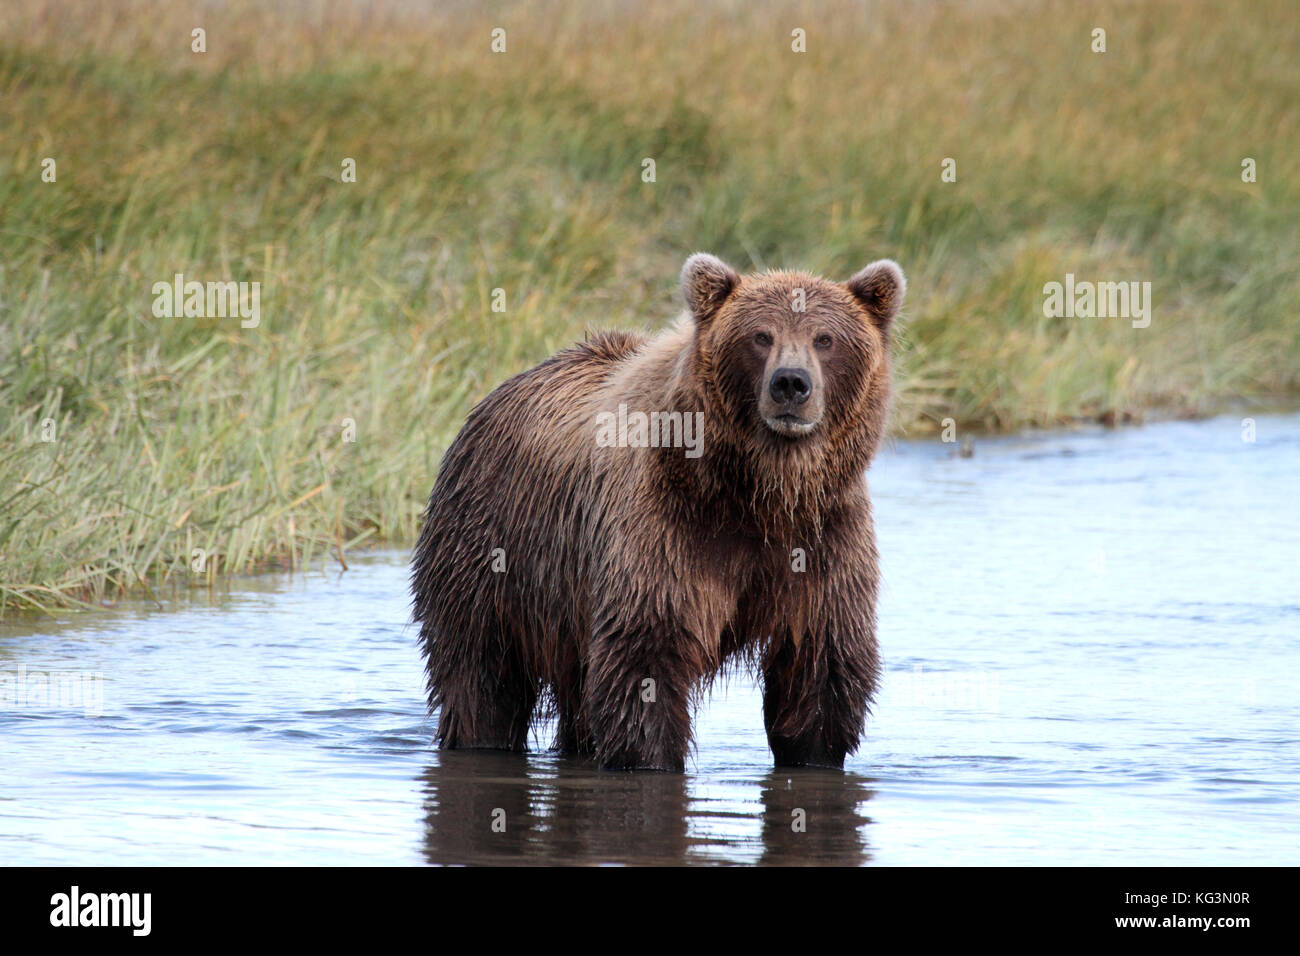 An Alaska brown bear, or grizzly, stands in the water of an Alaska stream waiting patiently for a spawning salmon to swim by. Stock Photo